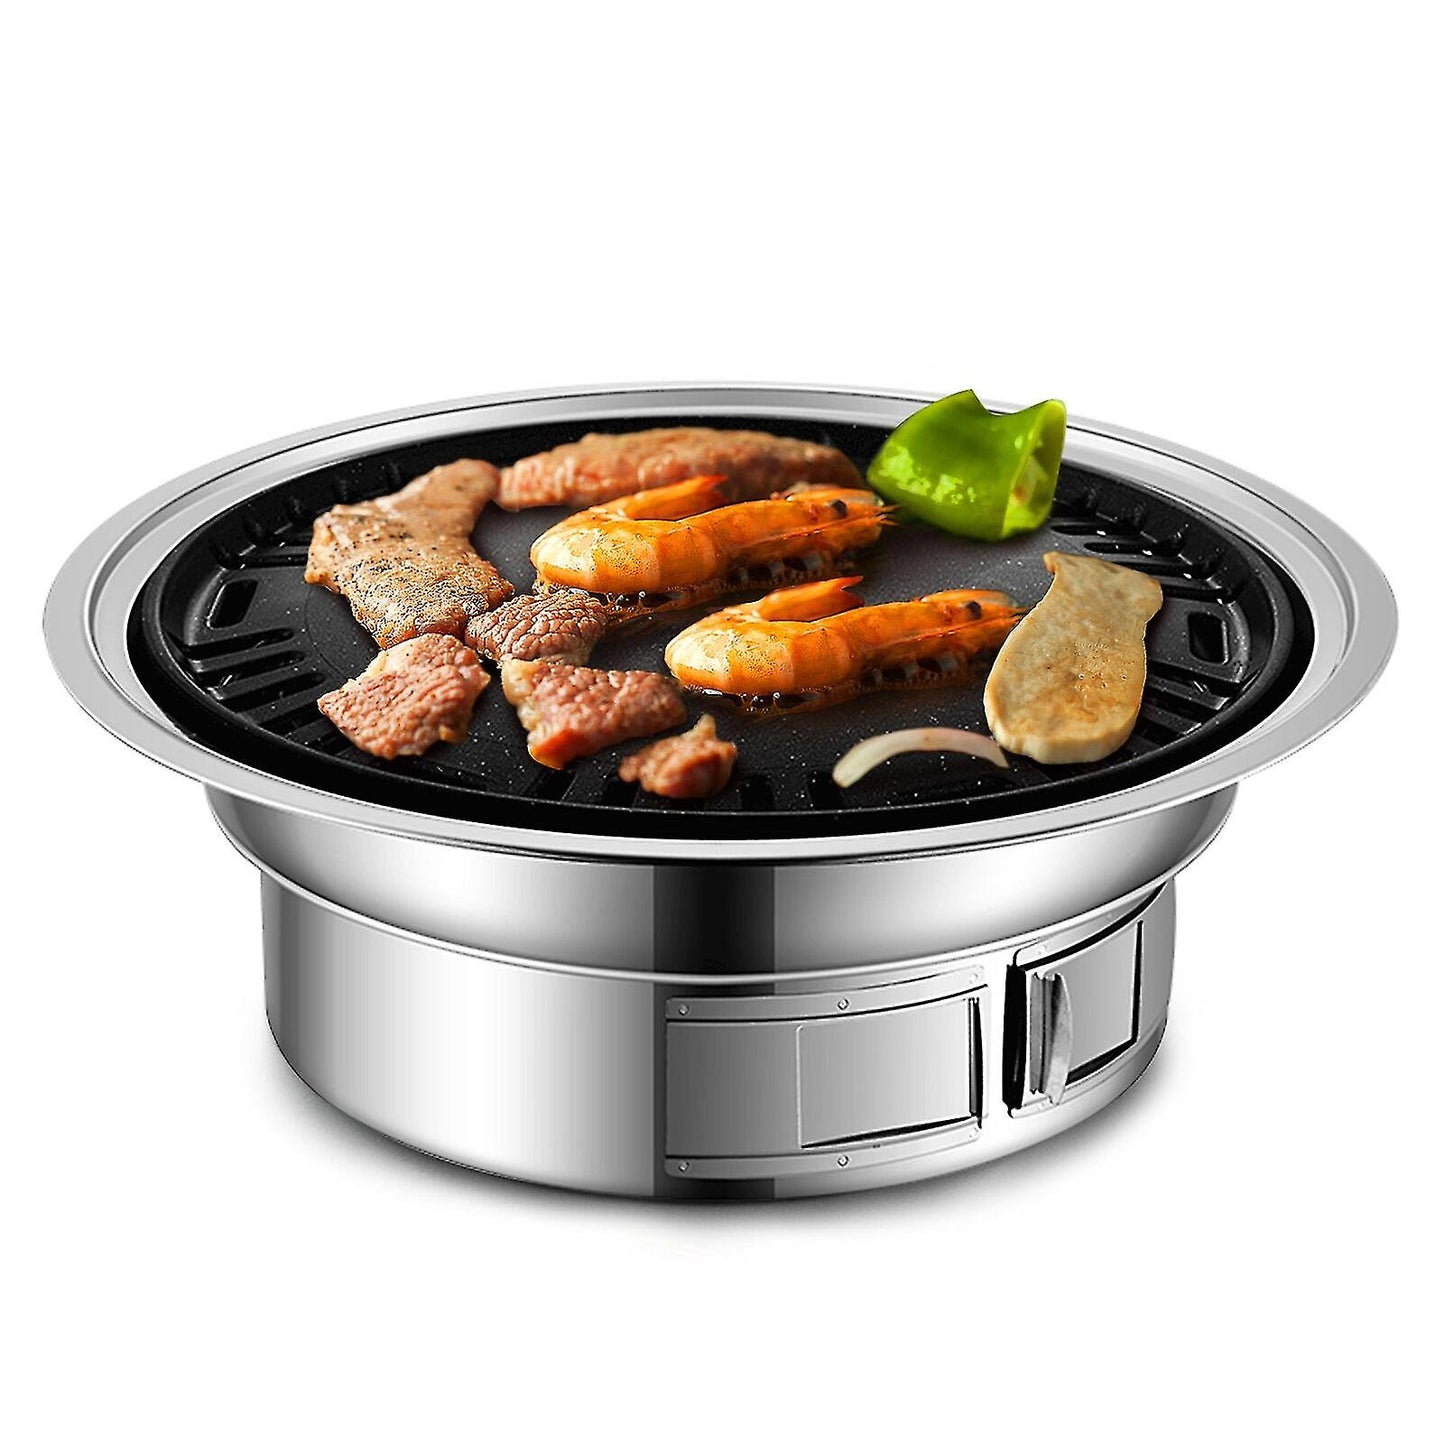 Portable Stainless Steel BBQ Grill | Affordable Buy